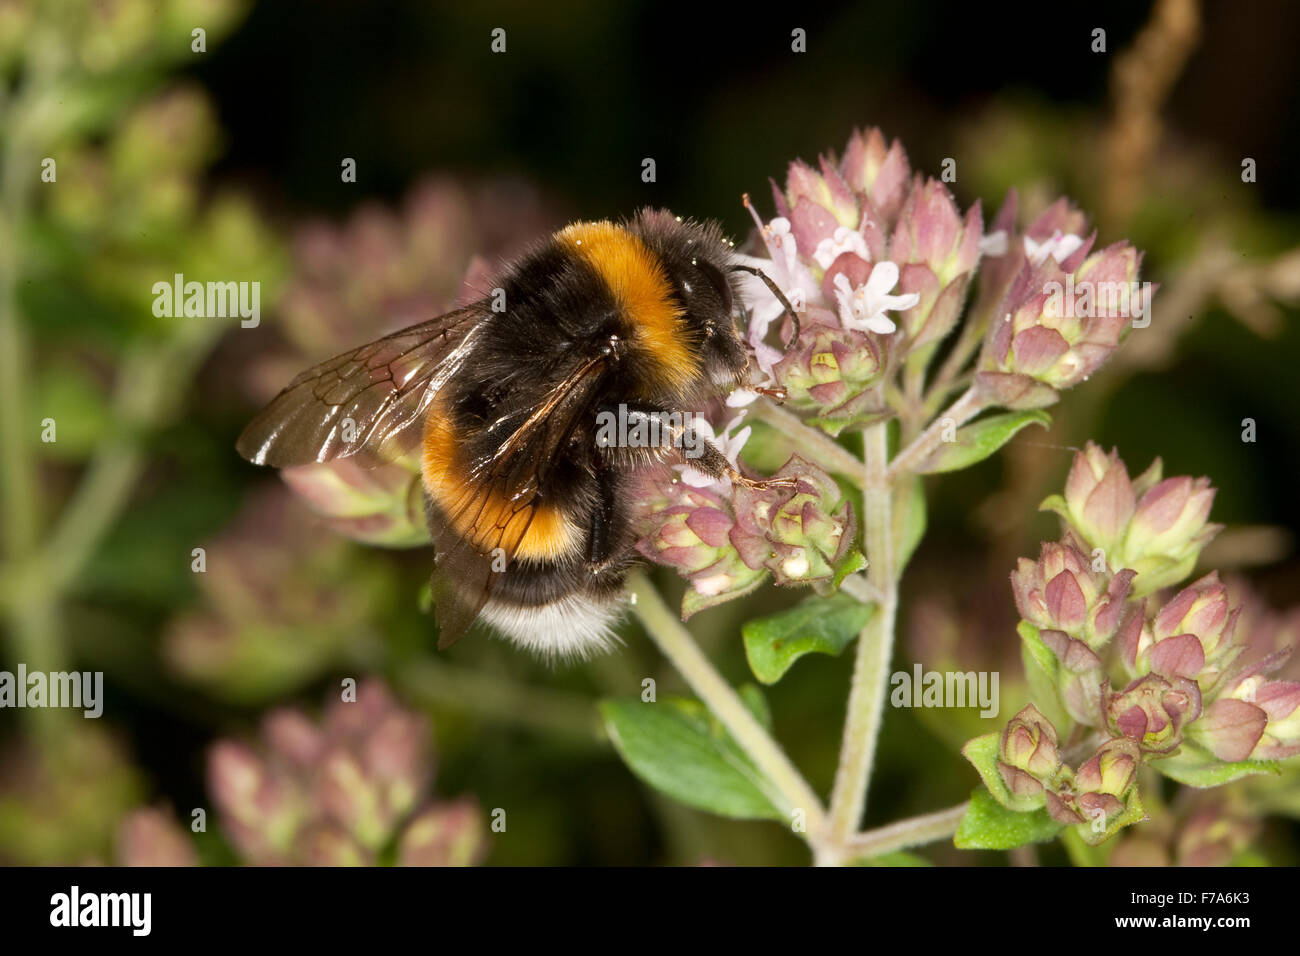 White-tailed bumble bee, bumblebee, Helle Erdhummel, Weißschwanz-Erdhummel, Hellgelbe Erdhummel, Bombus lucorum, Blütenbesuch Stock Photo